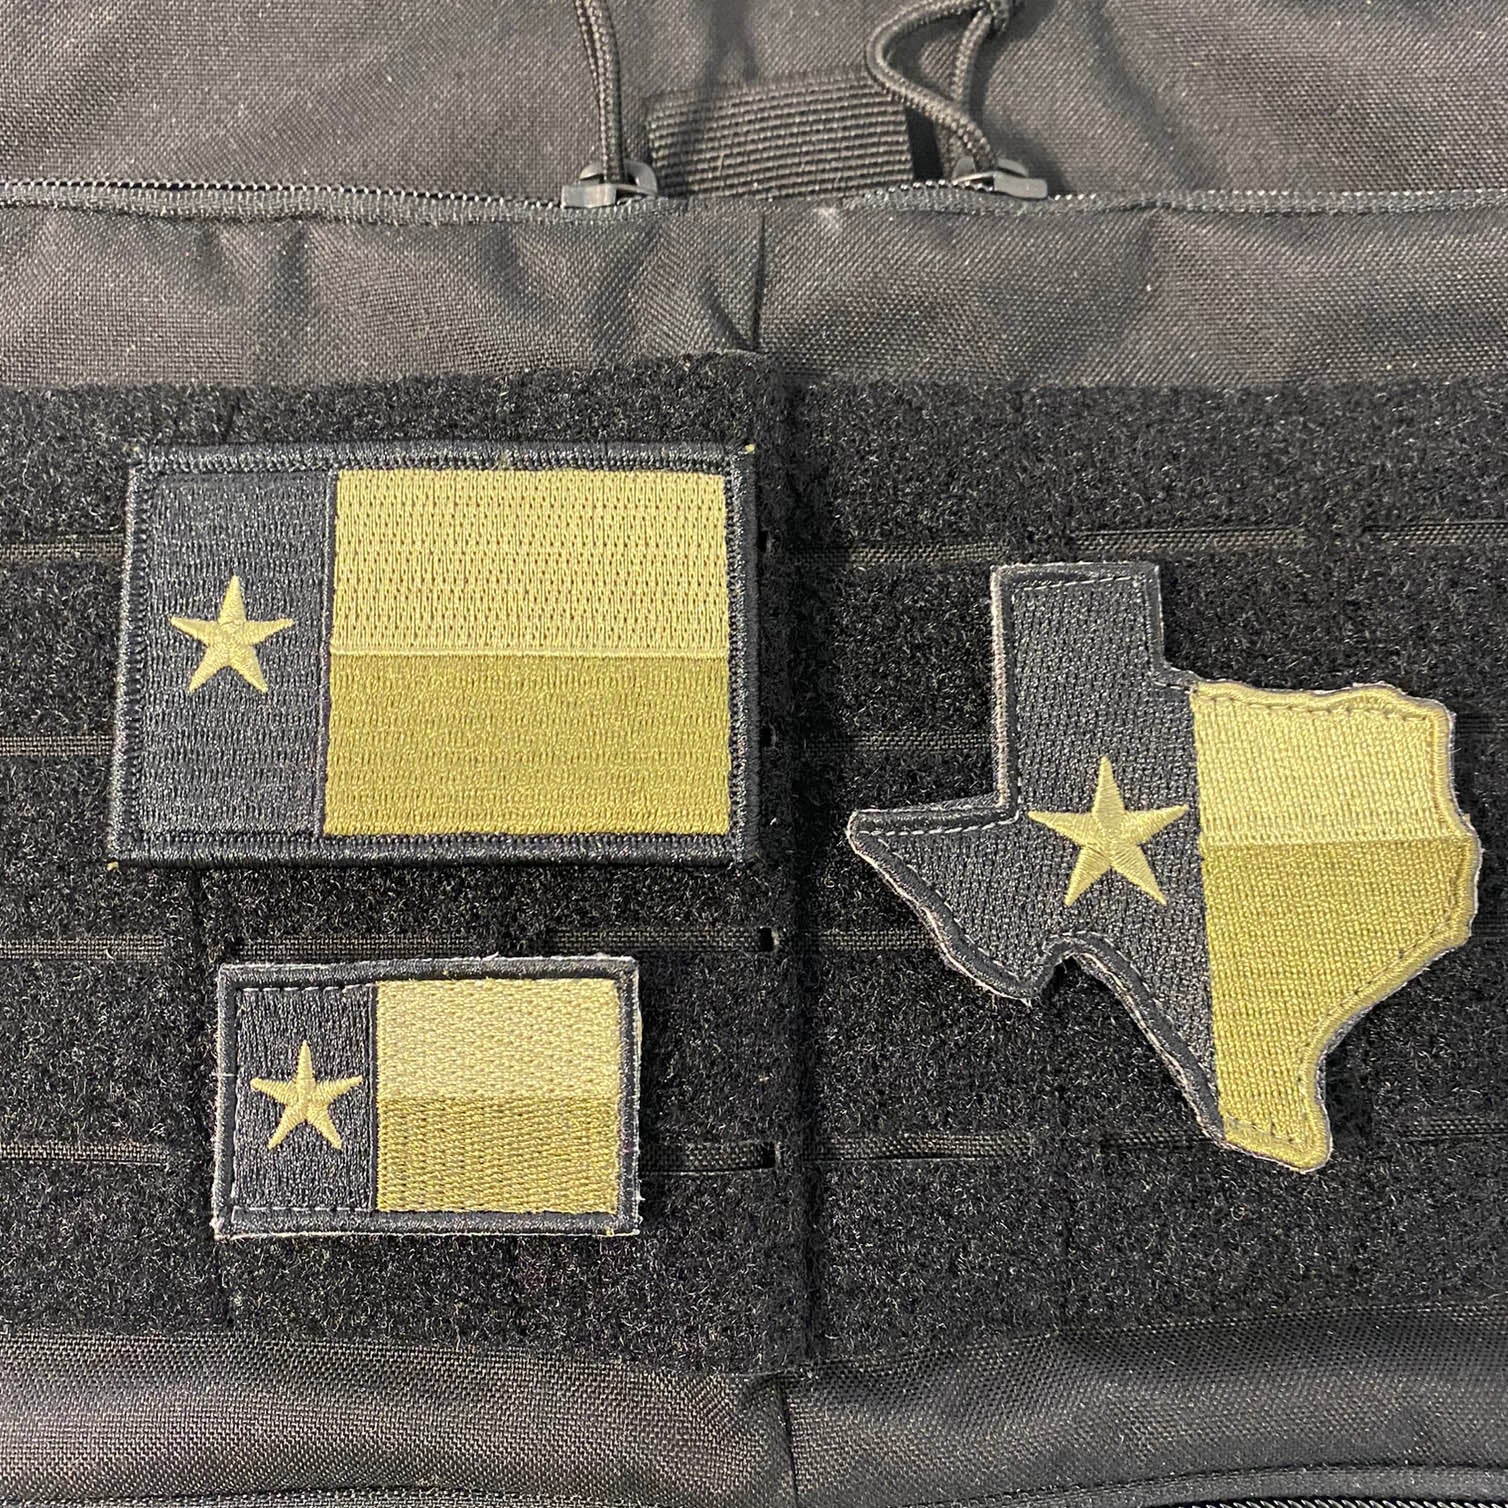 TEXAS Flag Tactical Patches - Set Of 3